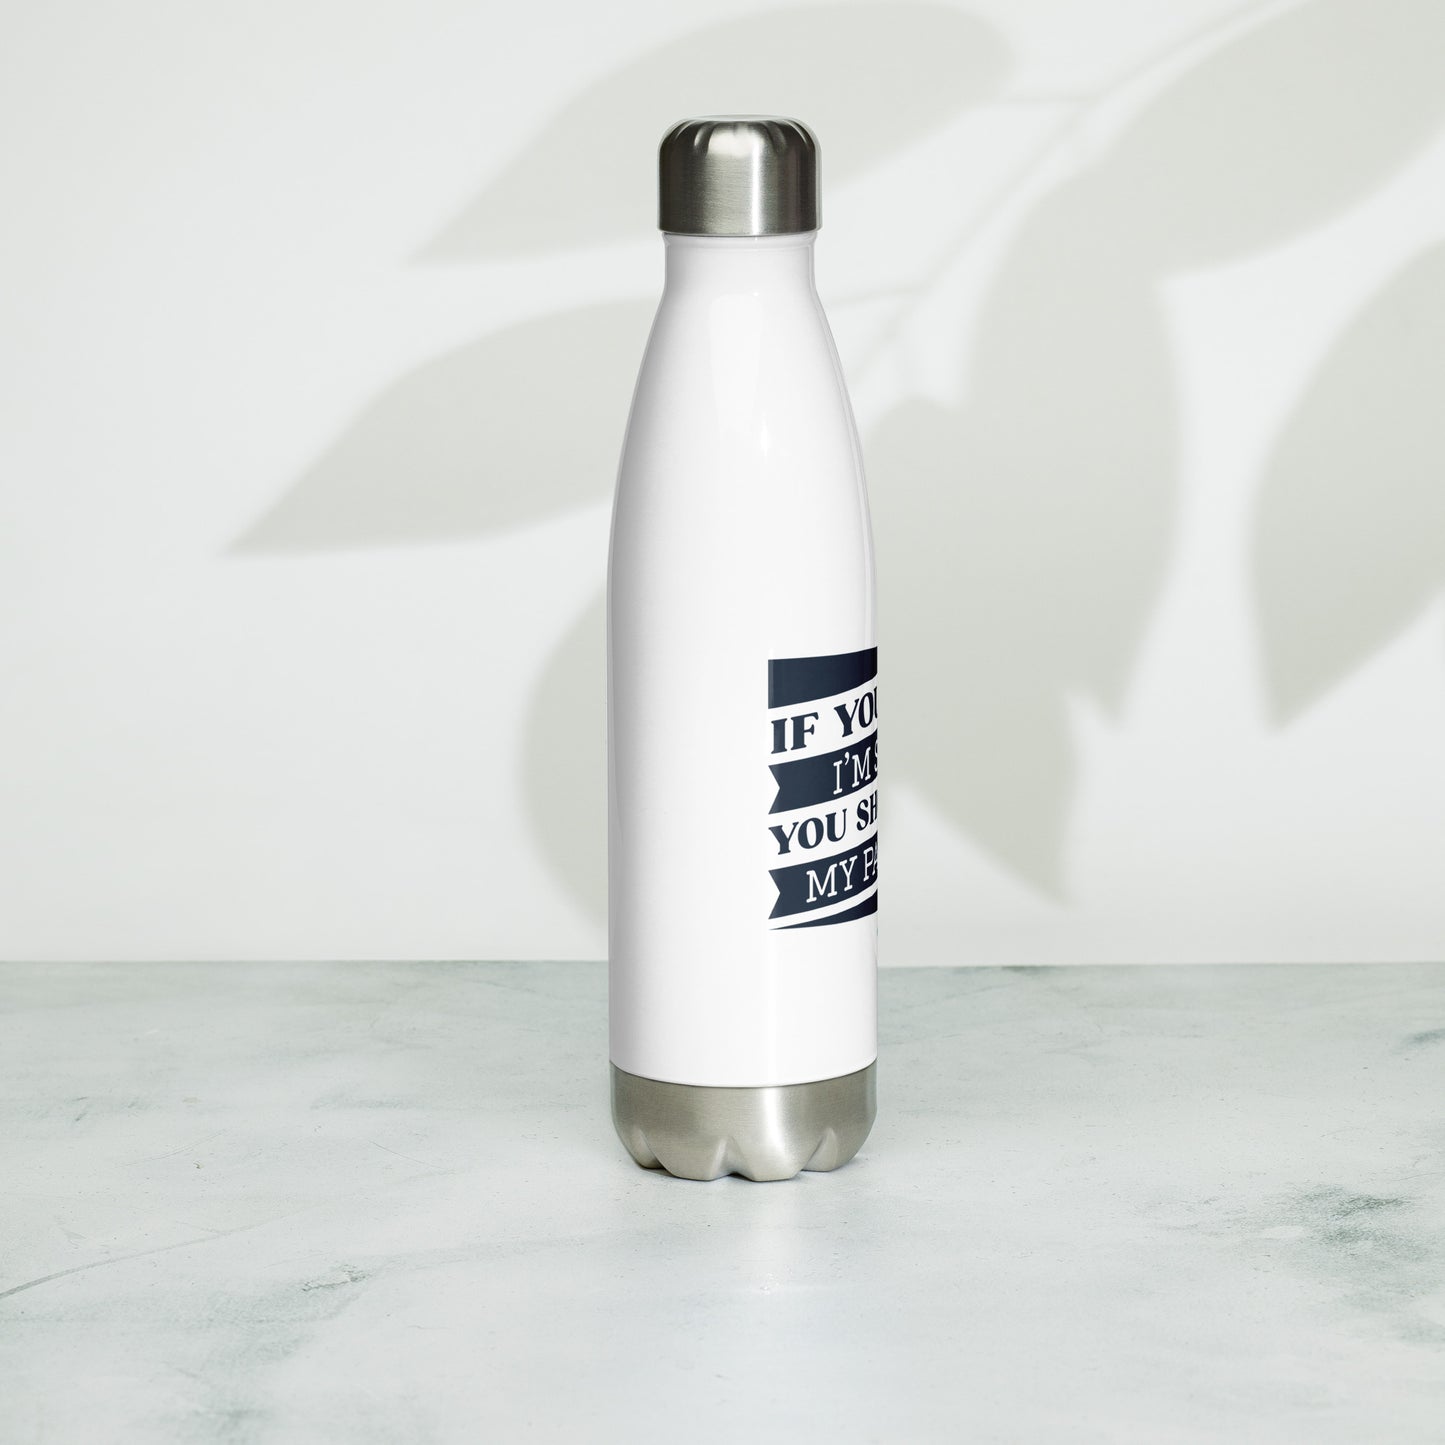 Stainless Steel Water Bottle - If you think I'm short, you should see my patience